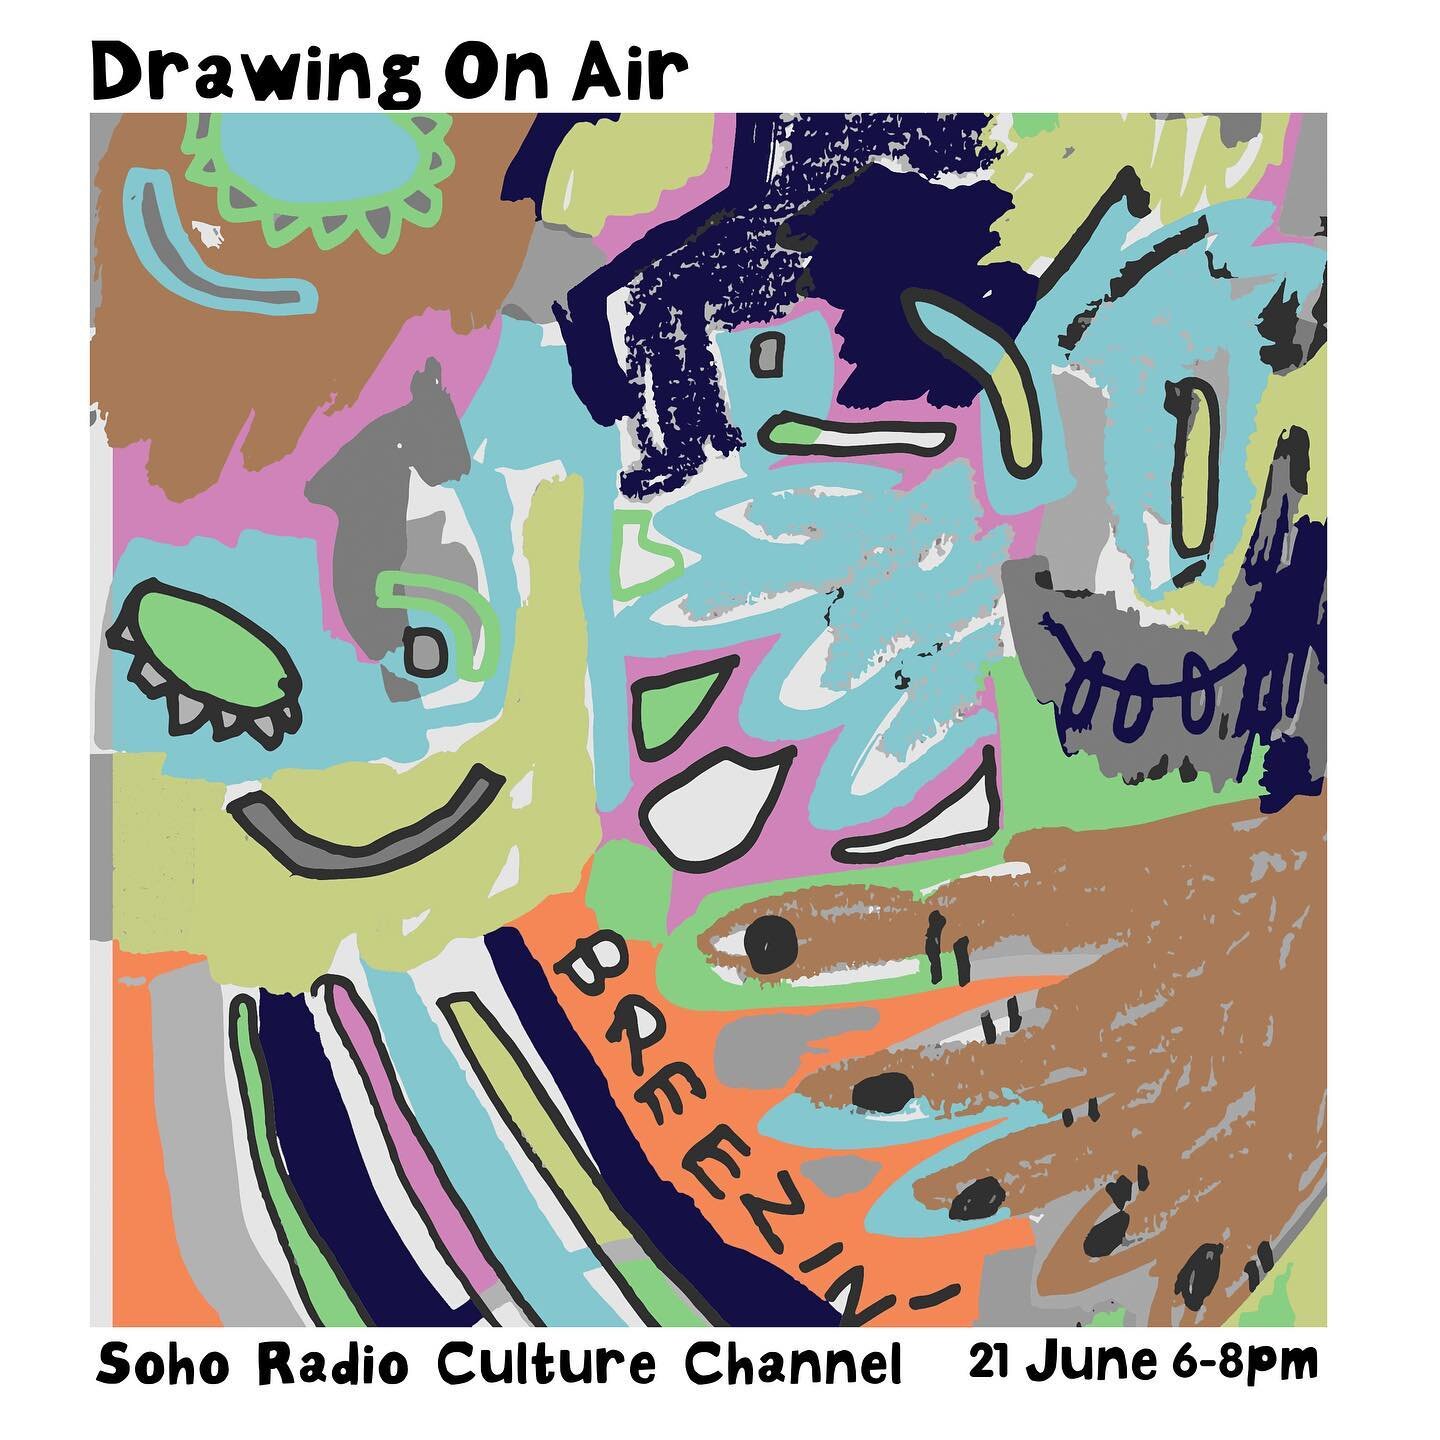 &lsquo;Drawing On Air&rsquo; this evening 6-8pm on @sohoradio culture channel. Tune in! Listen and Draw! Playing music by Lee Scratch Perry, Steve Reich, Beverly Glenn-Copeland, Aretha Franklin, Arthur Verocai and many more!